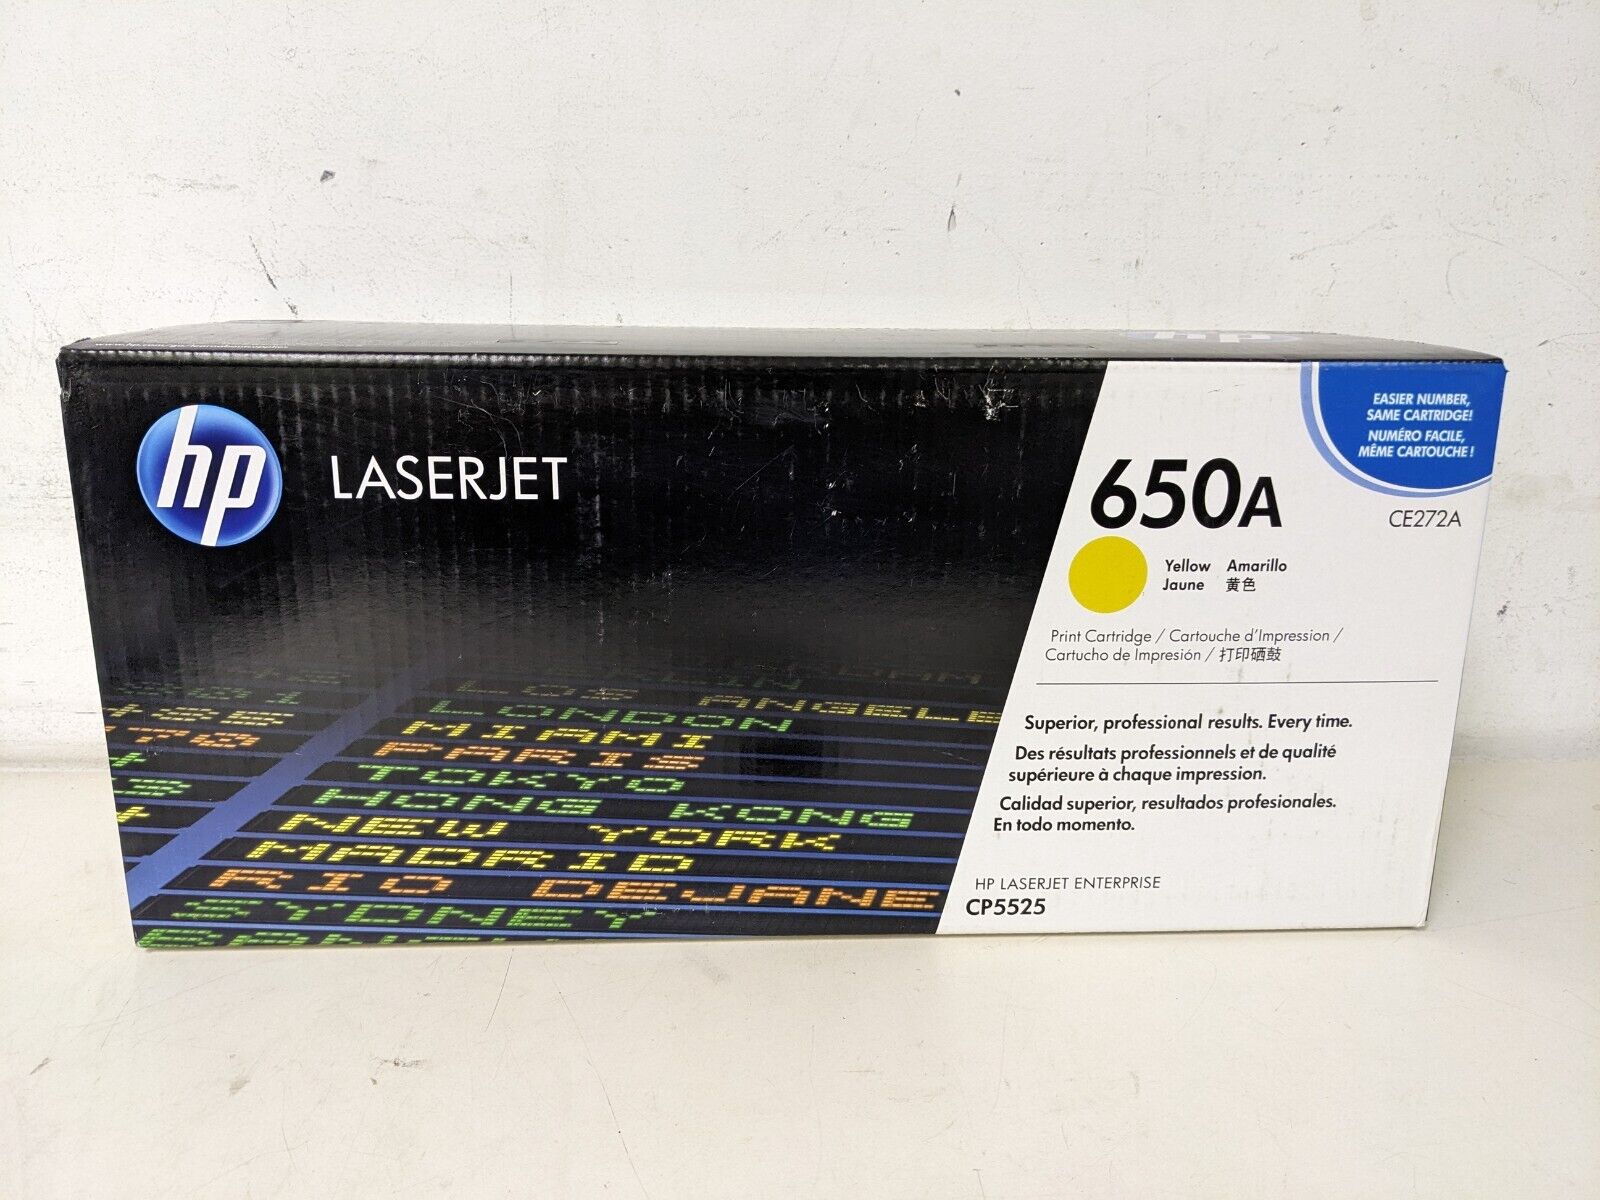 HP LaserJet 650A Yellow CE272A print cartridge Genuine Sealed Expired